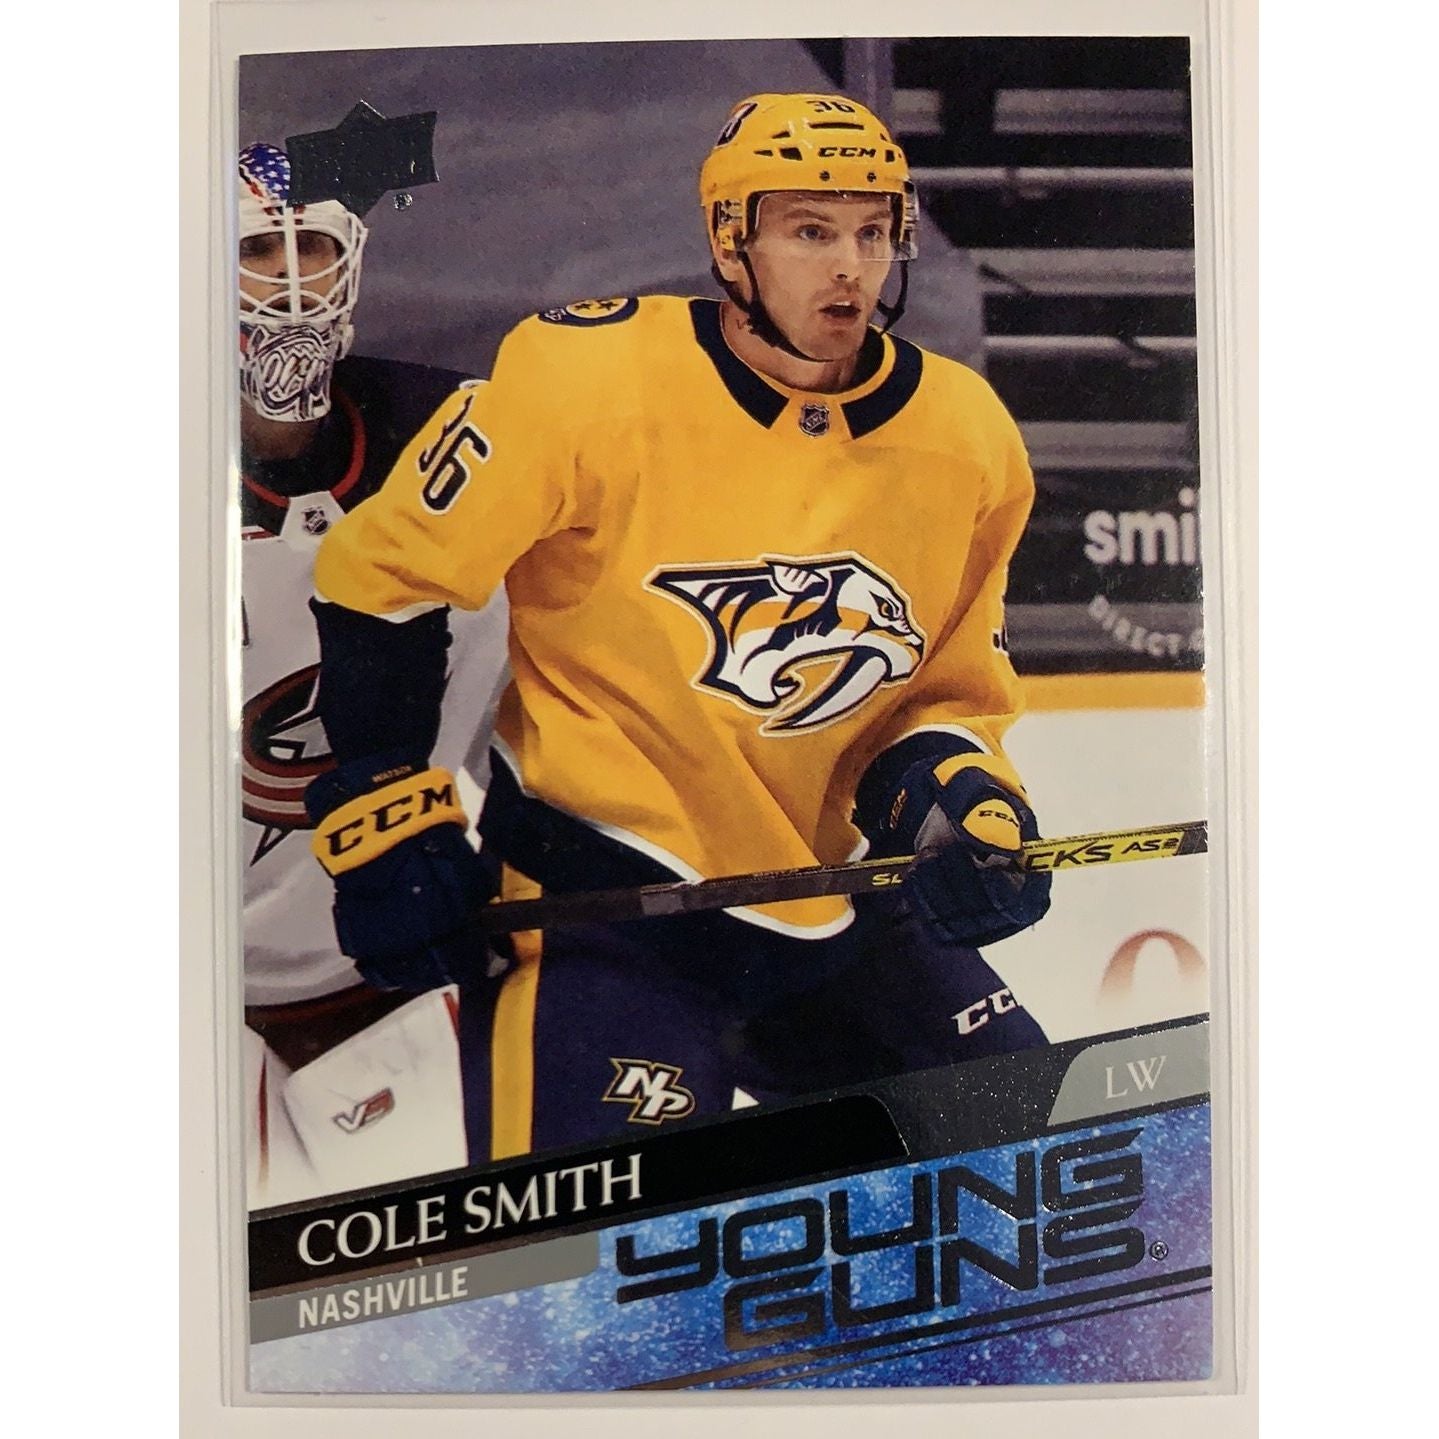  2020-21 Upper Deck Series 2 Cole Smith Young Guns  Local Legends Cards & Collectibles